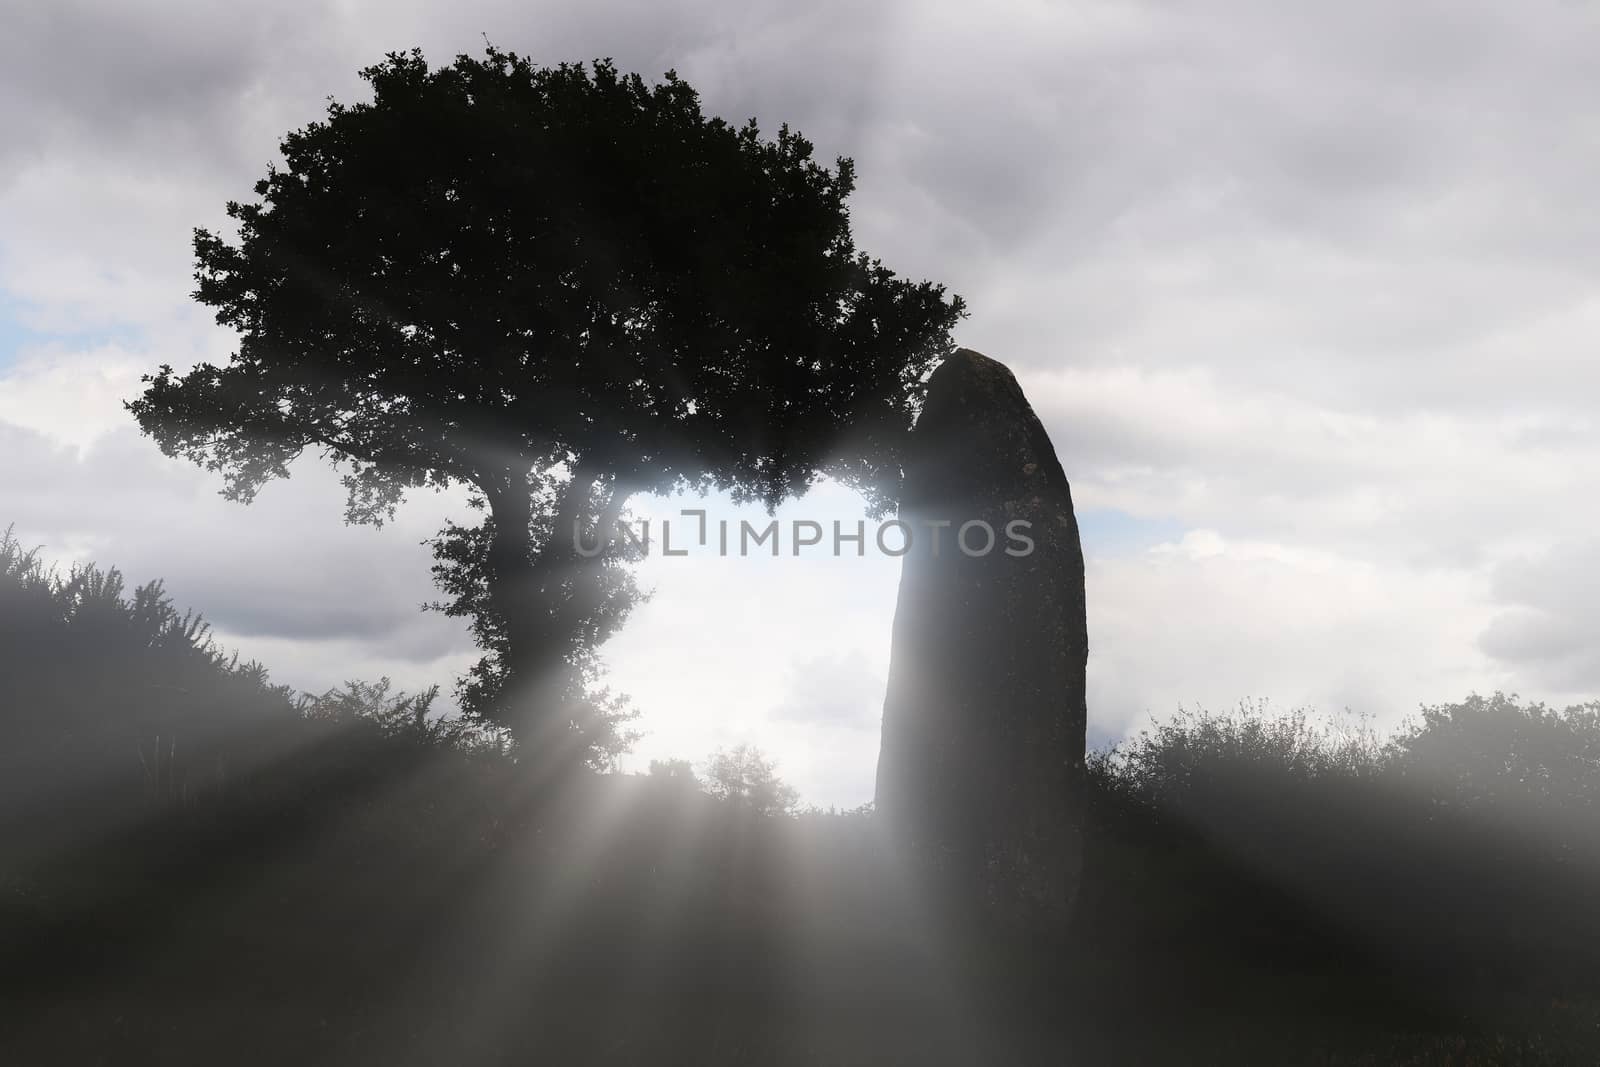 Menhir of Kergornec - megalithic monument in Brittany, France by Mibuch